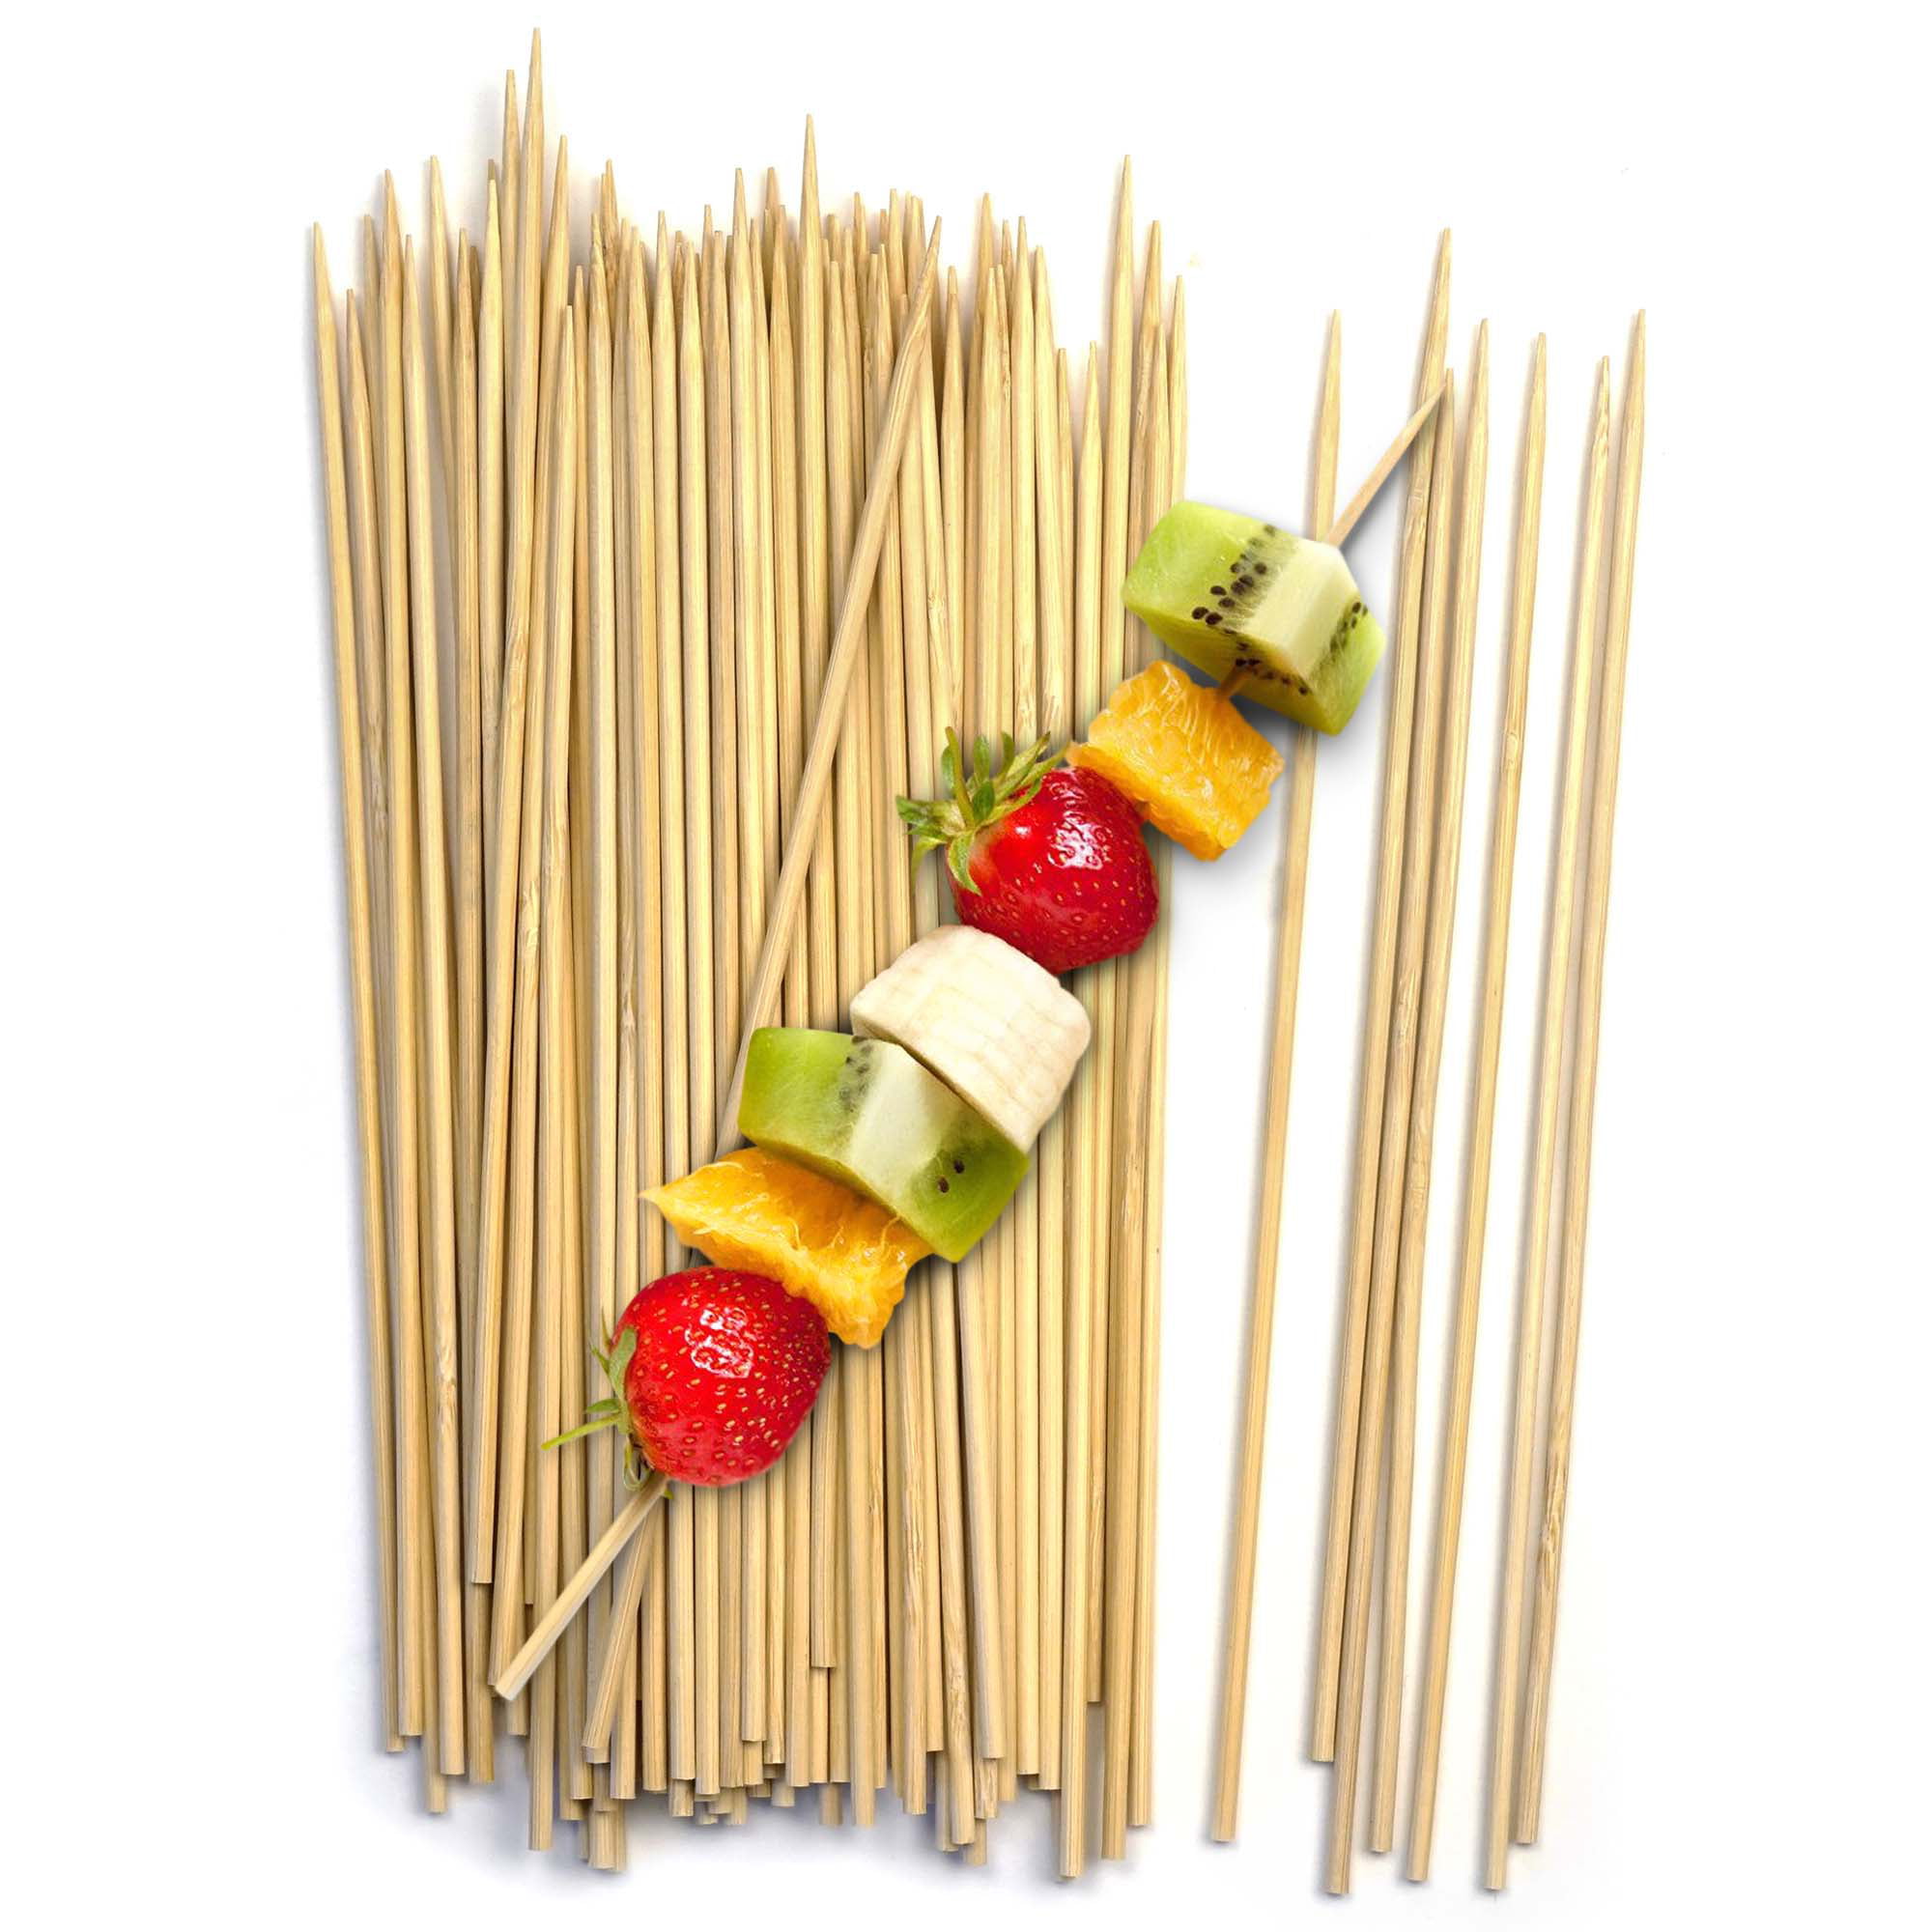 2.5ft Garden Sticks 100 Pieces Perfect for Camping or Outdoor Party 5mm Thick Safe Extra Long Multipurpose Marshmallow Smores Roasting Bamboo Sticks Skewers BambooMN Premium 30 Inch